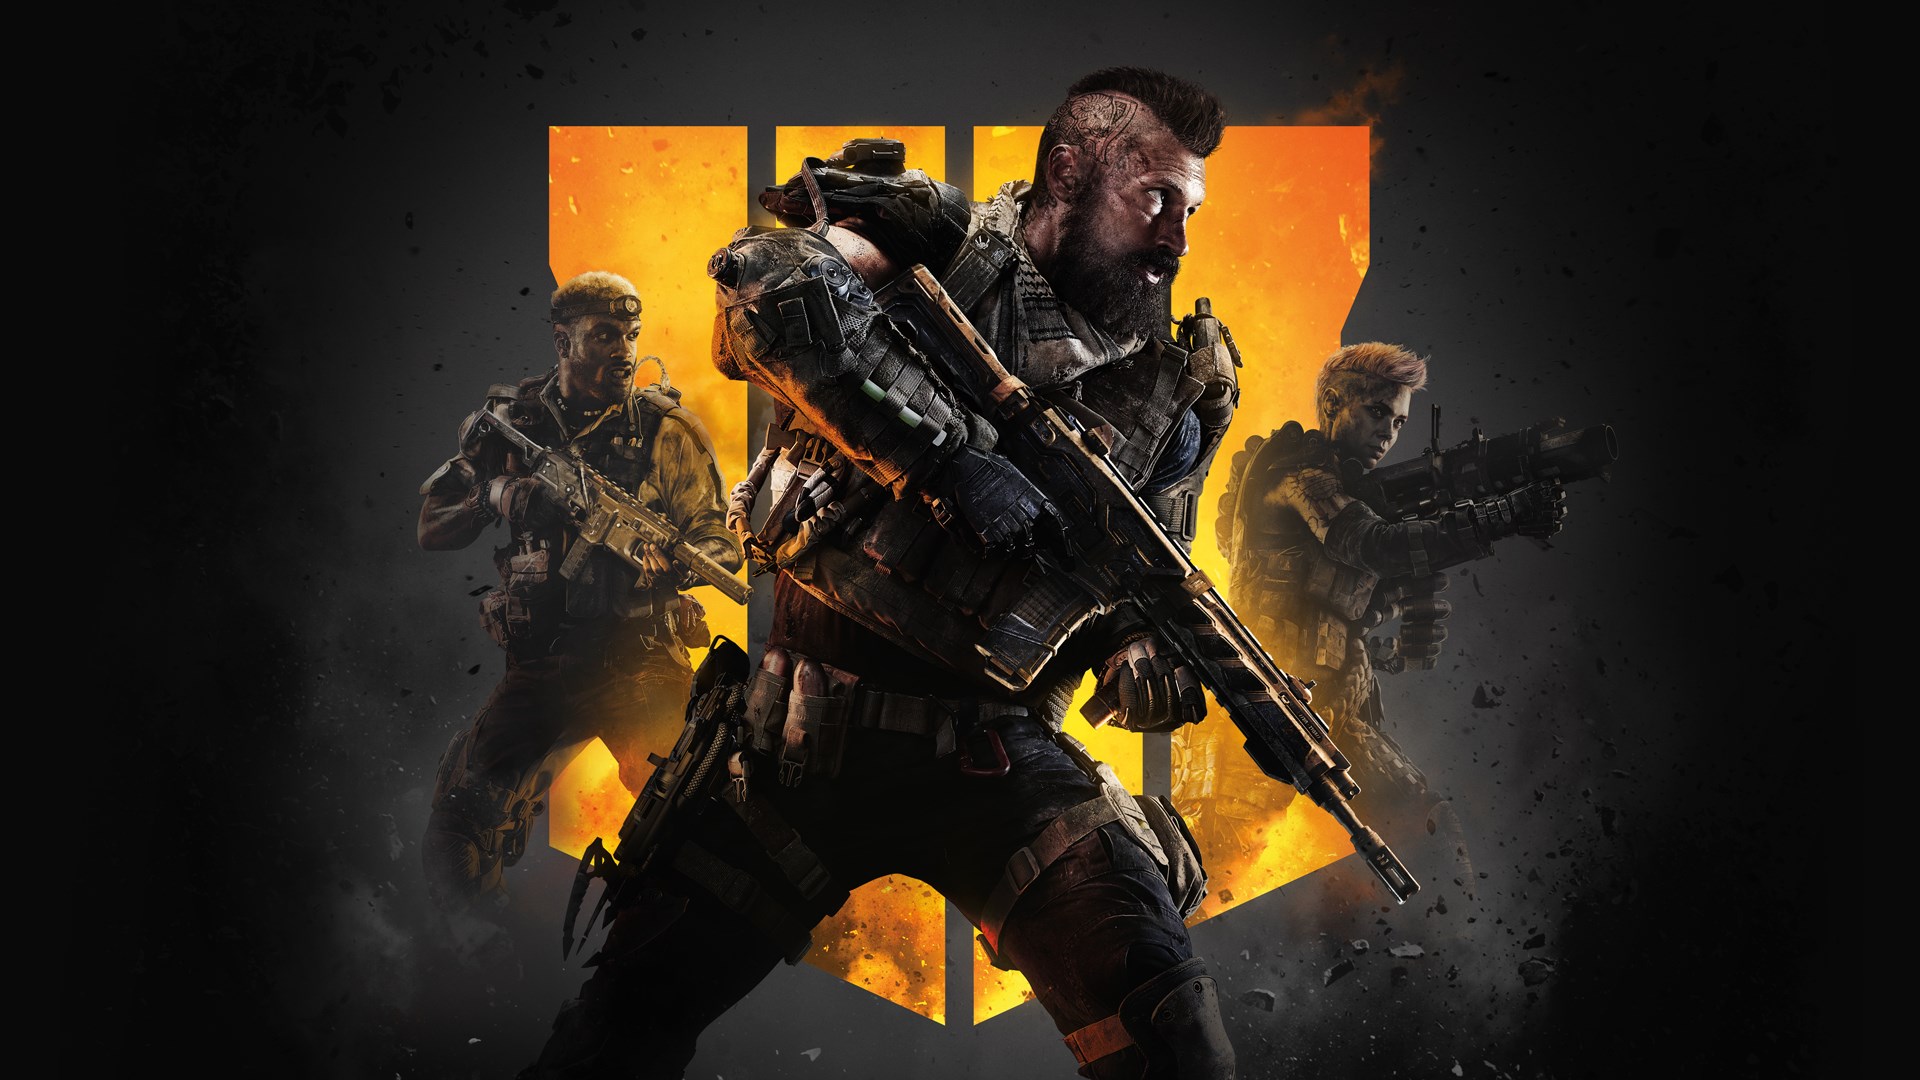 call of duty black ops 4 cheapest xbox one